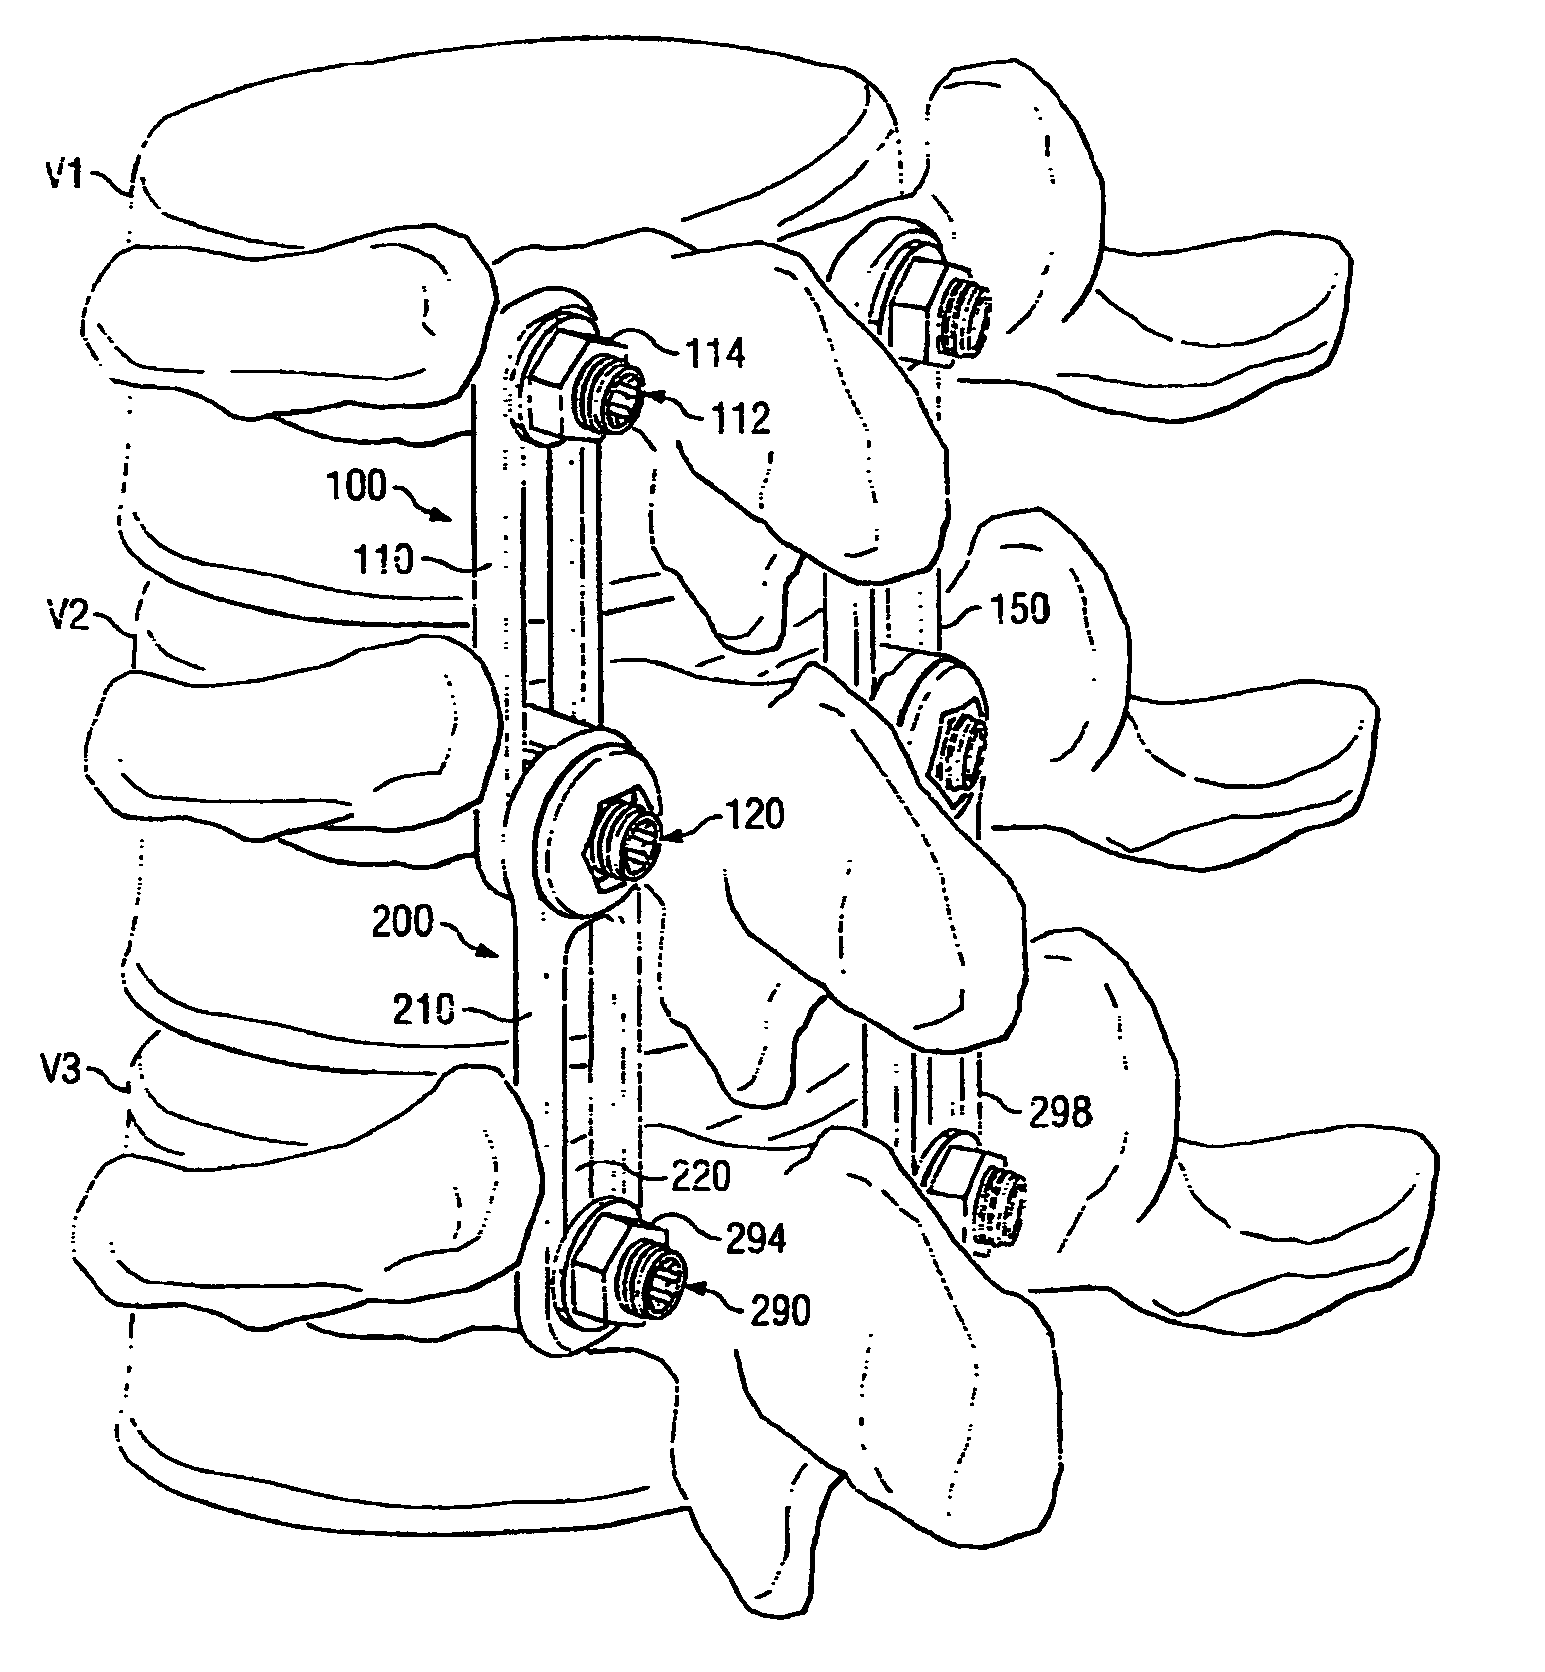 Revision Fixation Plate and Method of Use